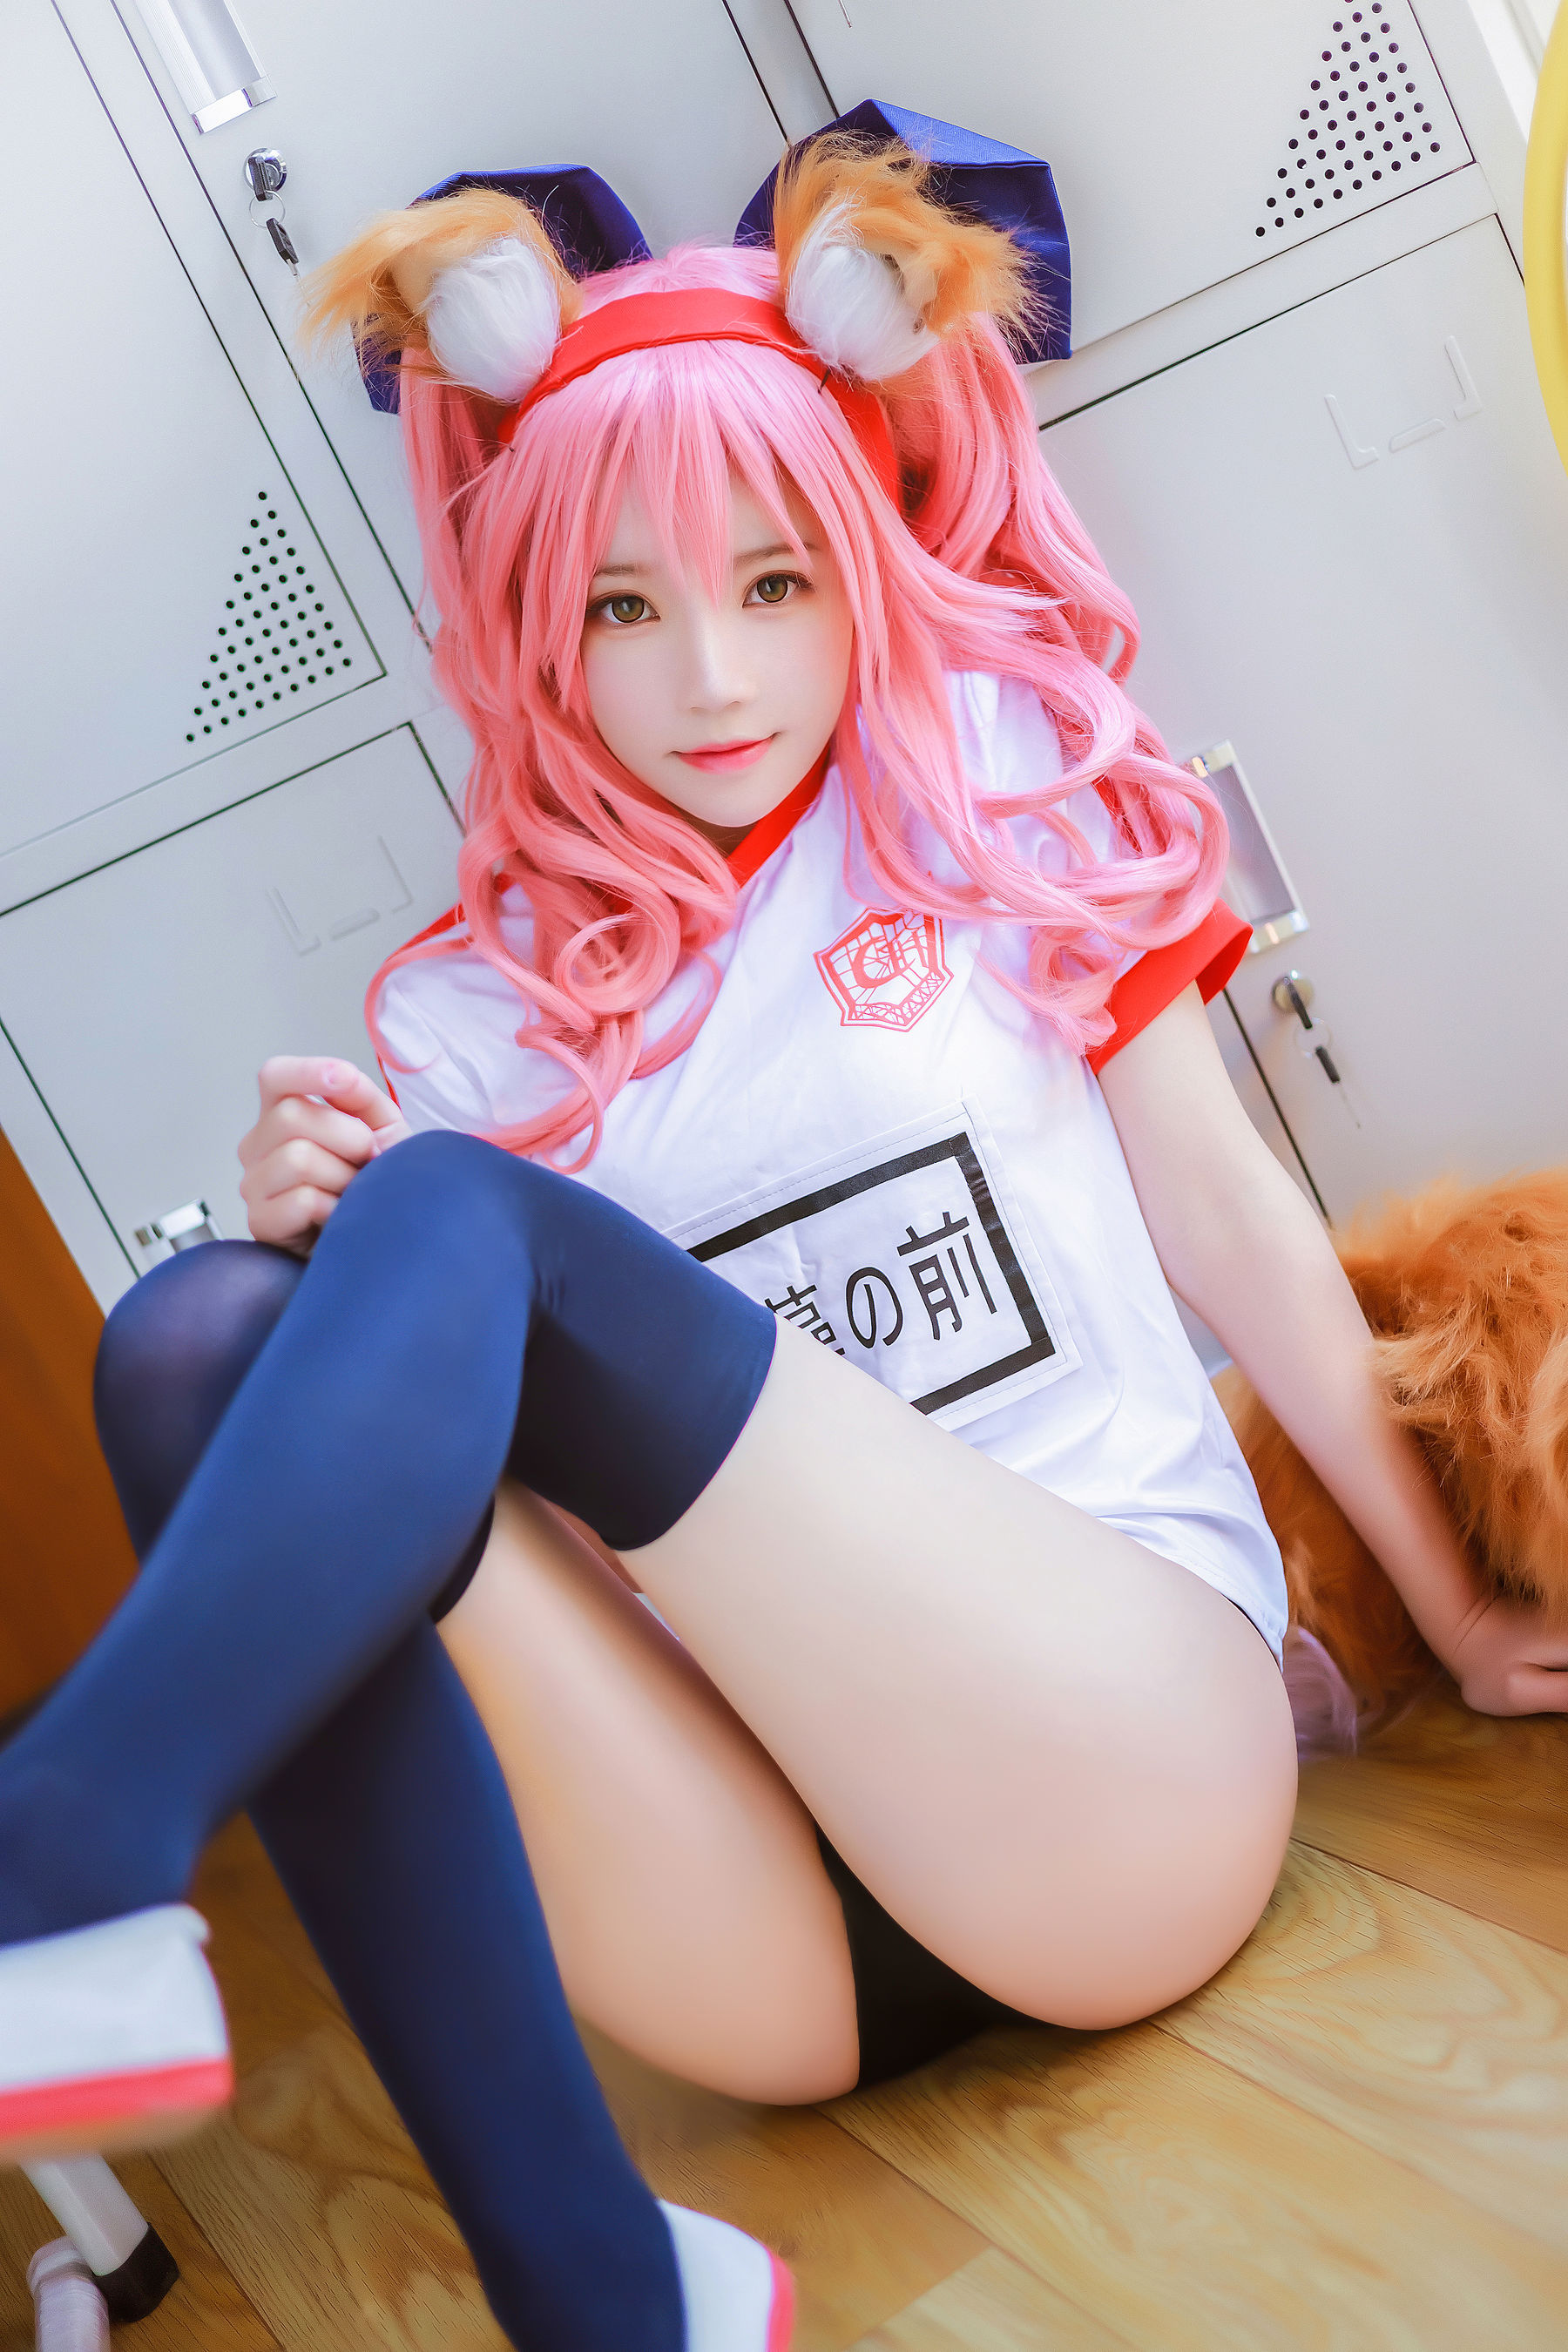 [Net Red COSER Photo] Cherry Peach Meow - Tamamo former gym suit Page 13 No.817bb6